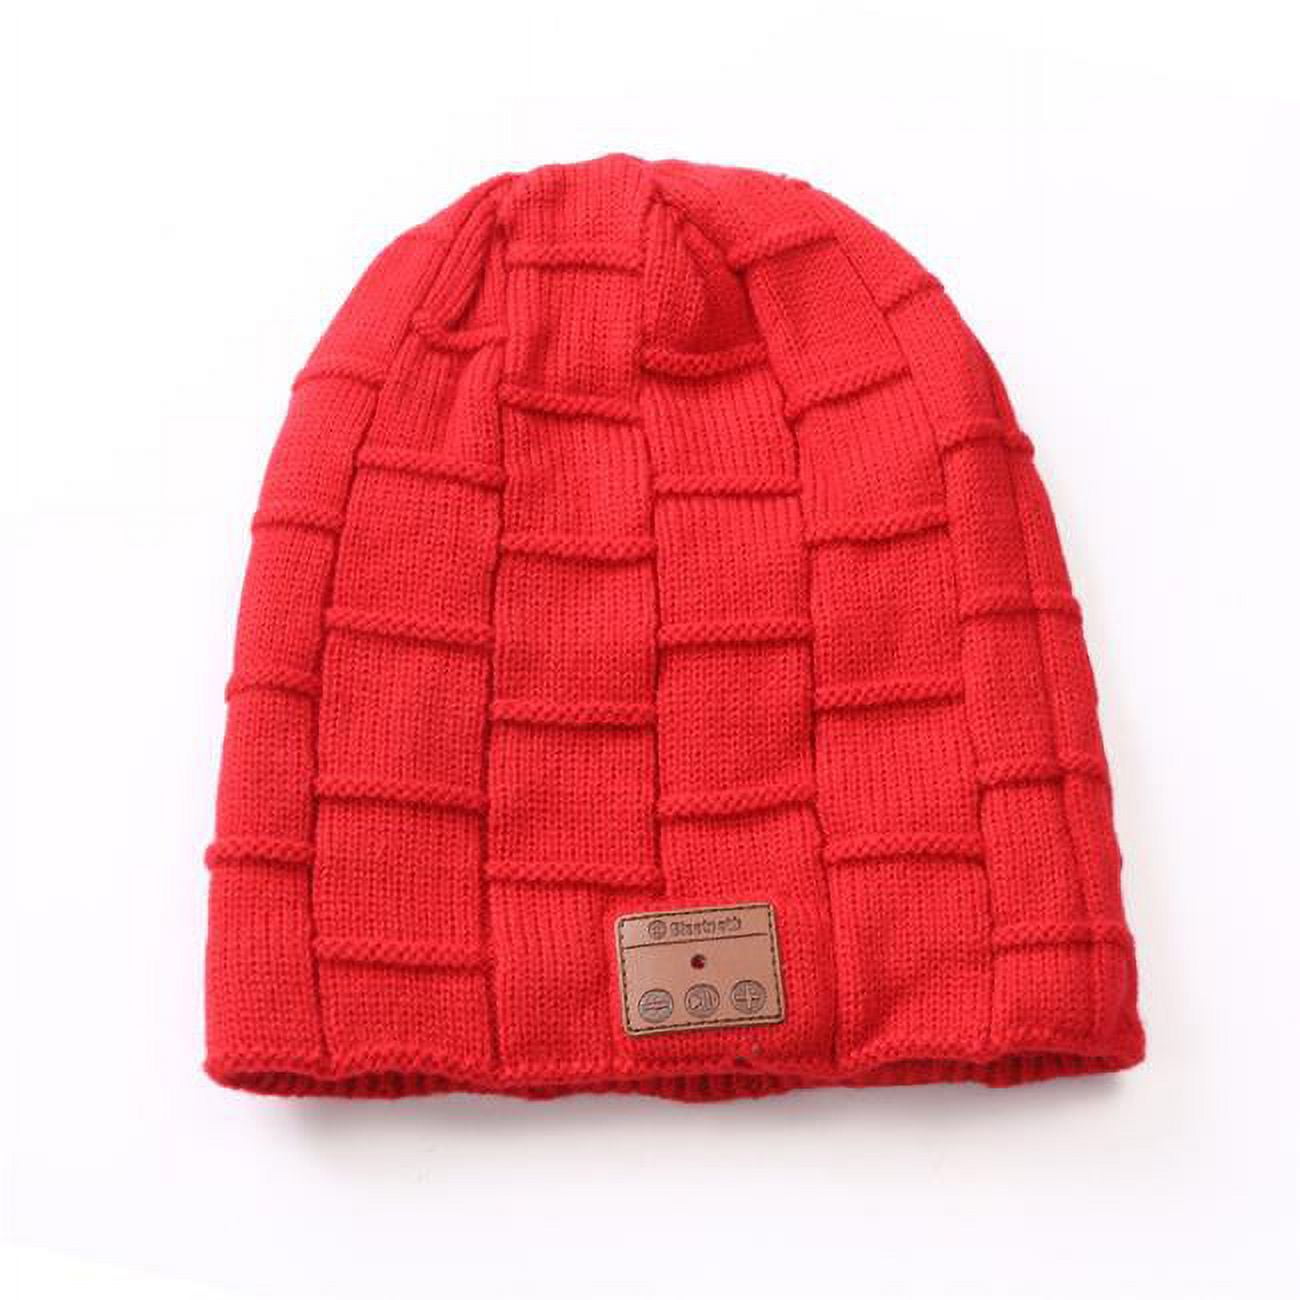 Picture of 3P Experts Beanie Jam - Warm Lined Wireless Headphone  Red          